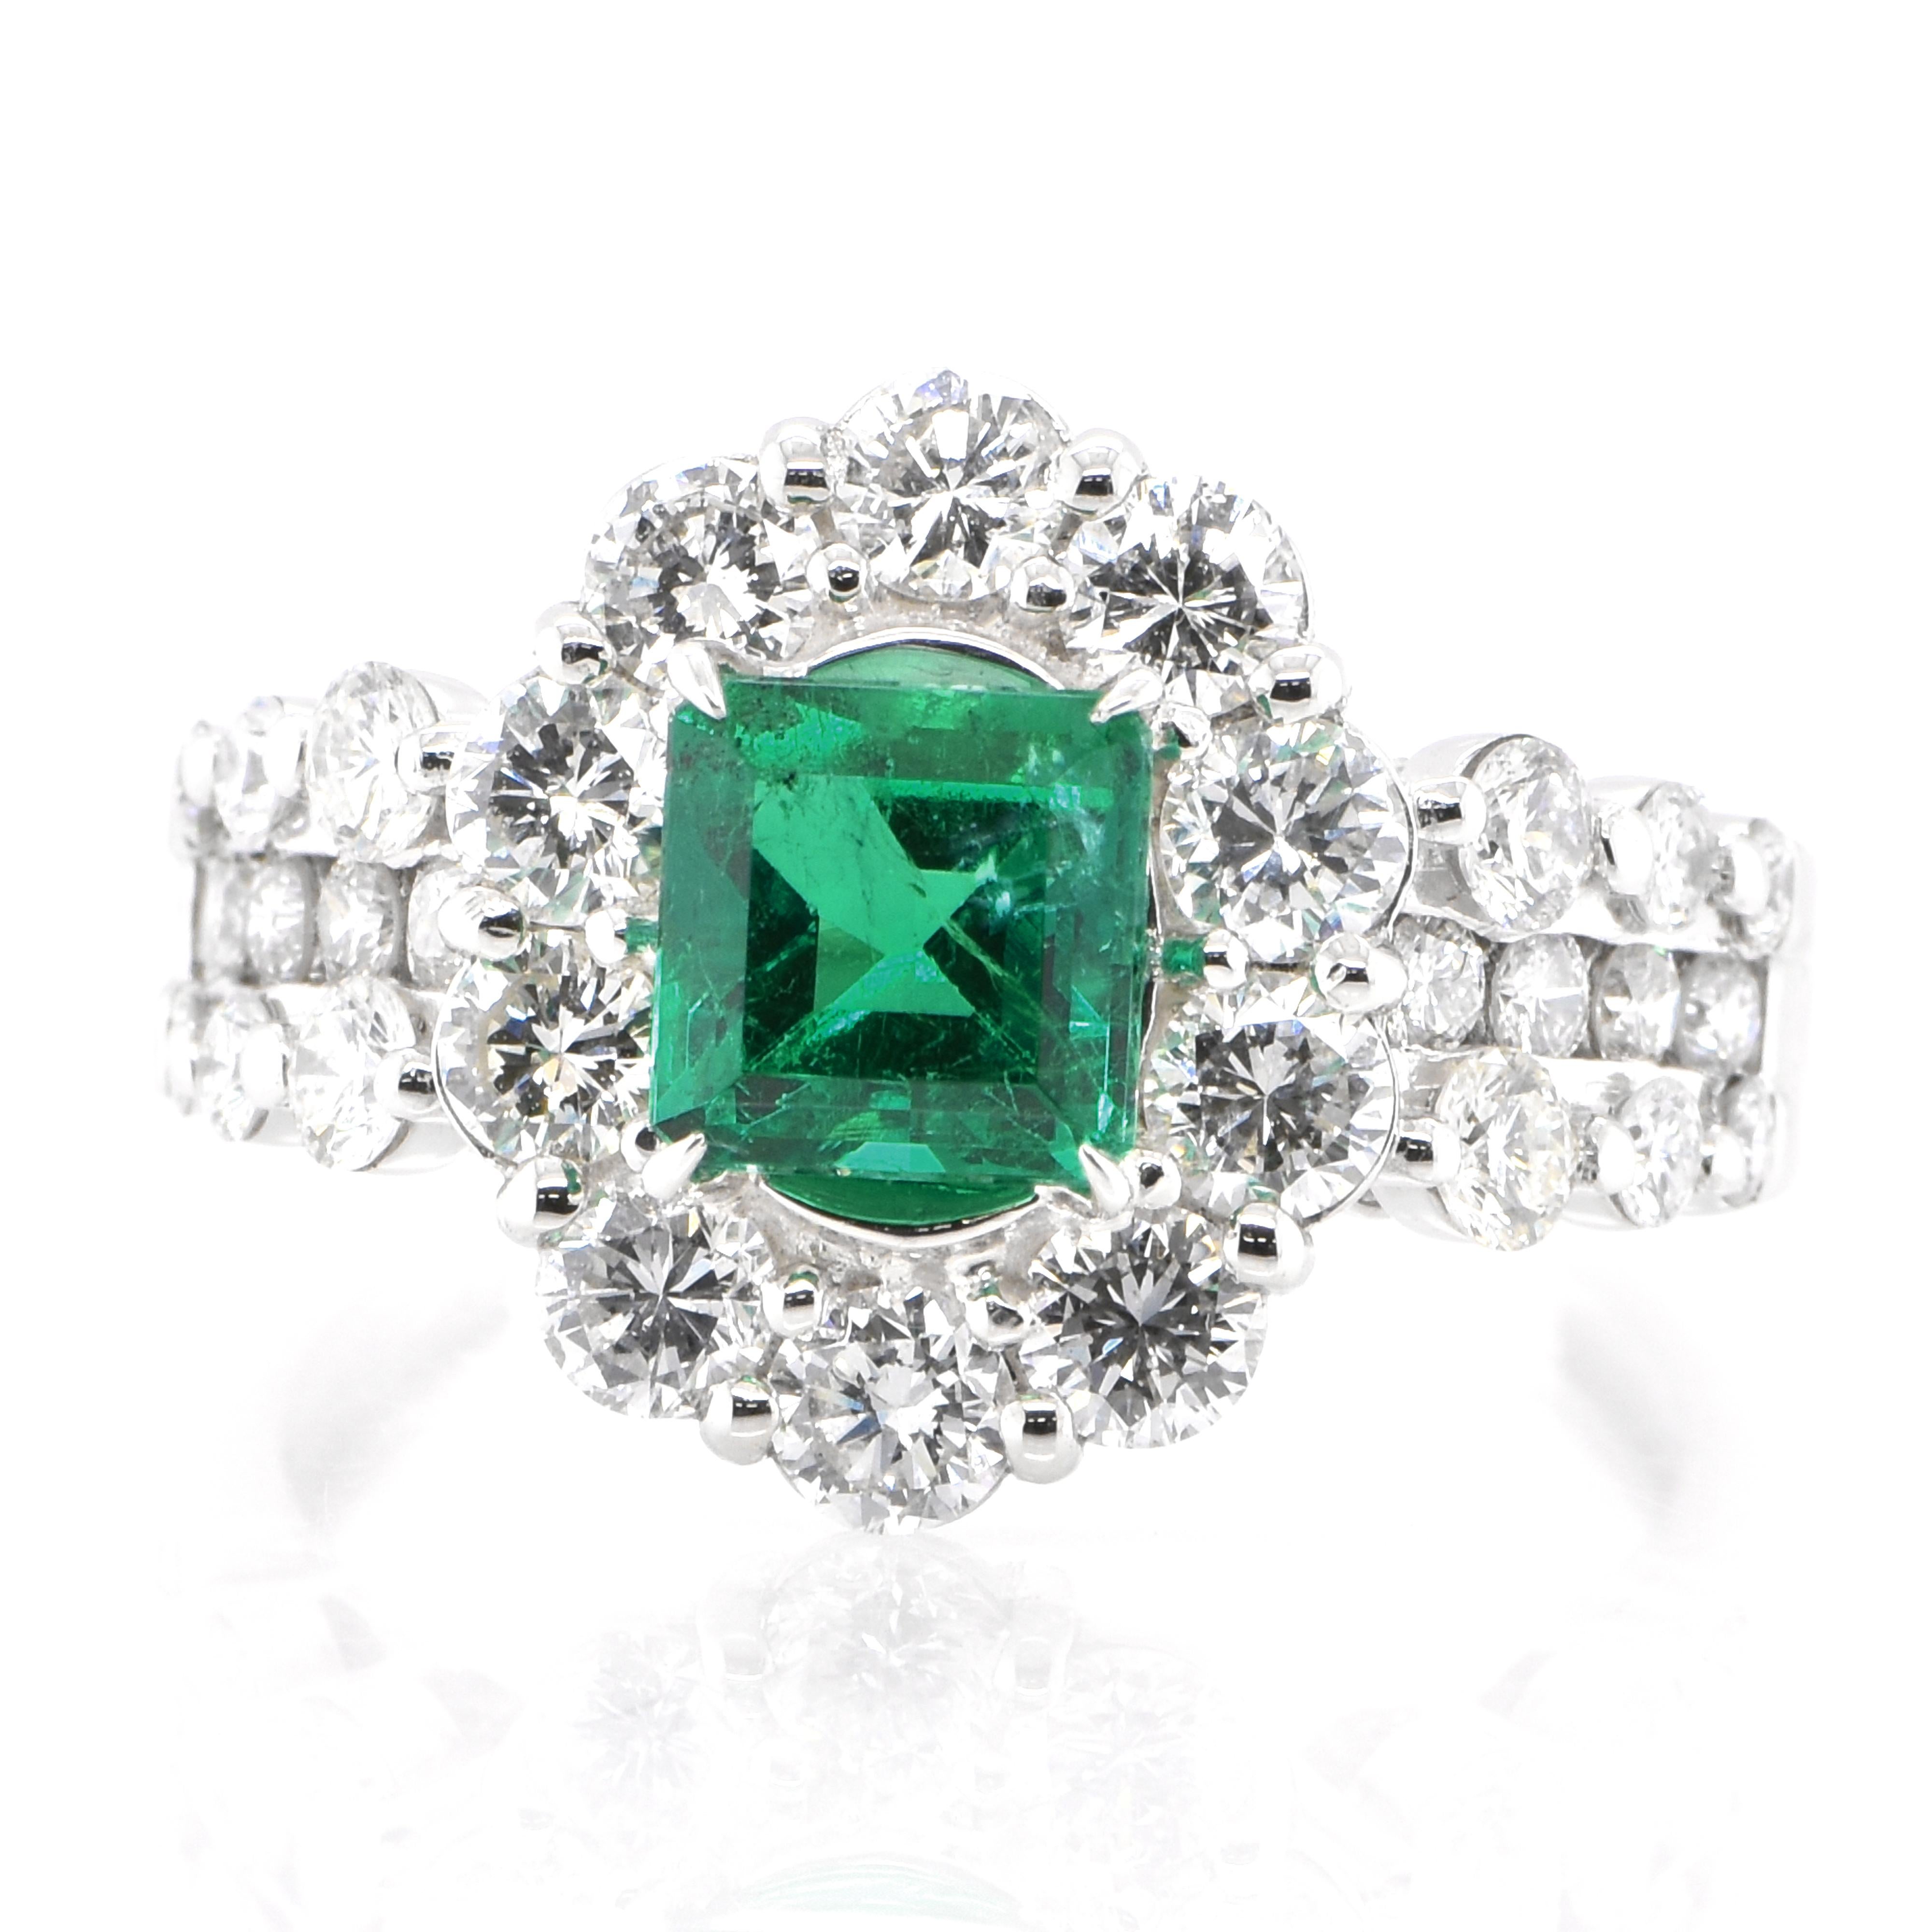 A stunning ring featuring a 1.192.19 Carat Natural Colombian, Vivid Green Emerald and 0.99 Carats of Diamond Accents set in Platinum. People have admired emerald’s green for thousands of years. Emeralds have always been associated with the lushest